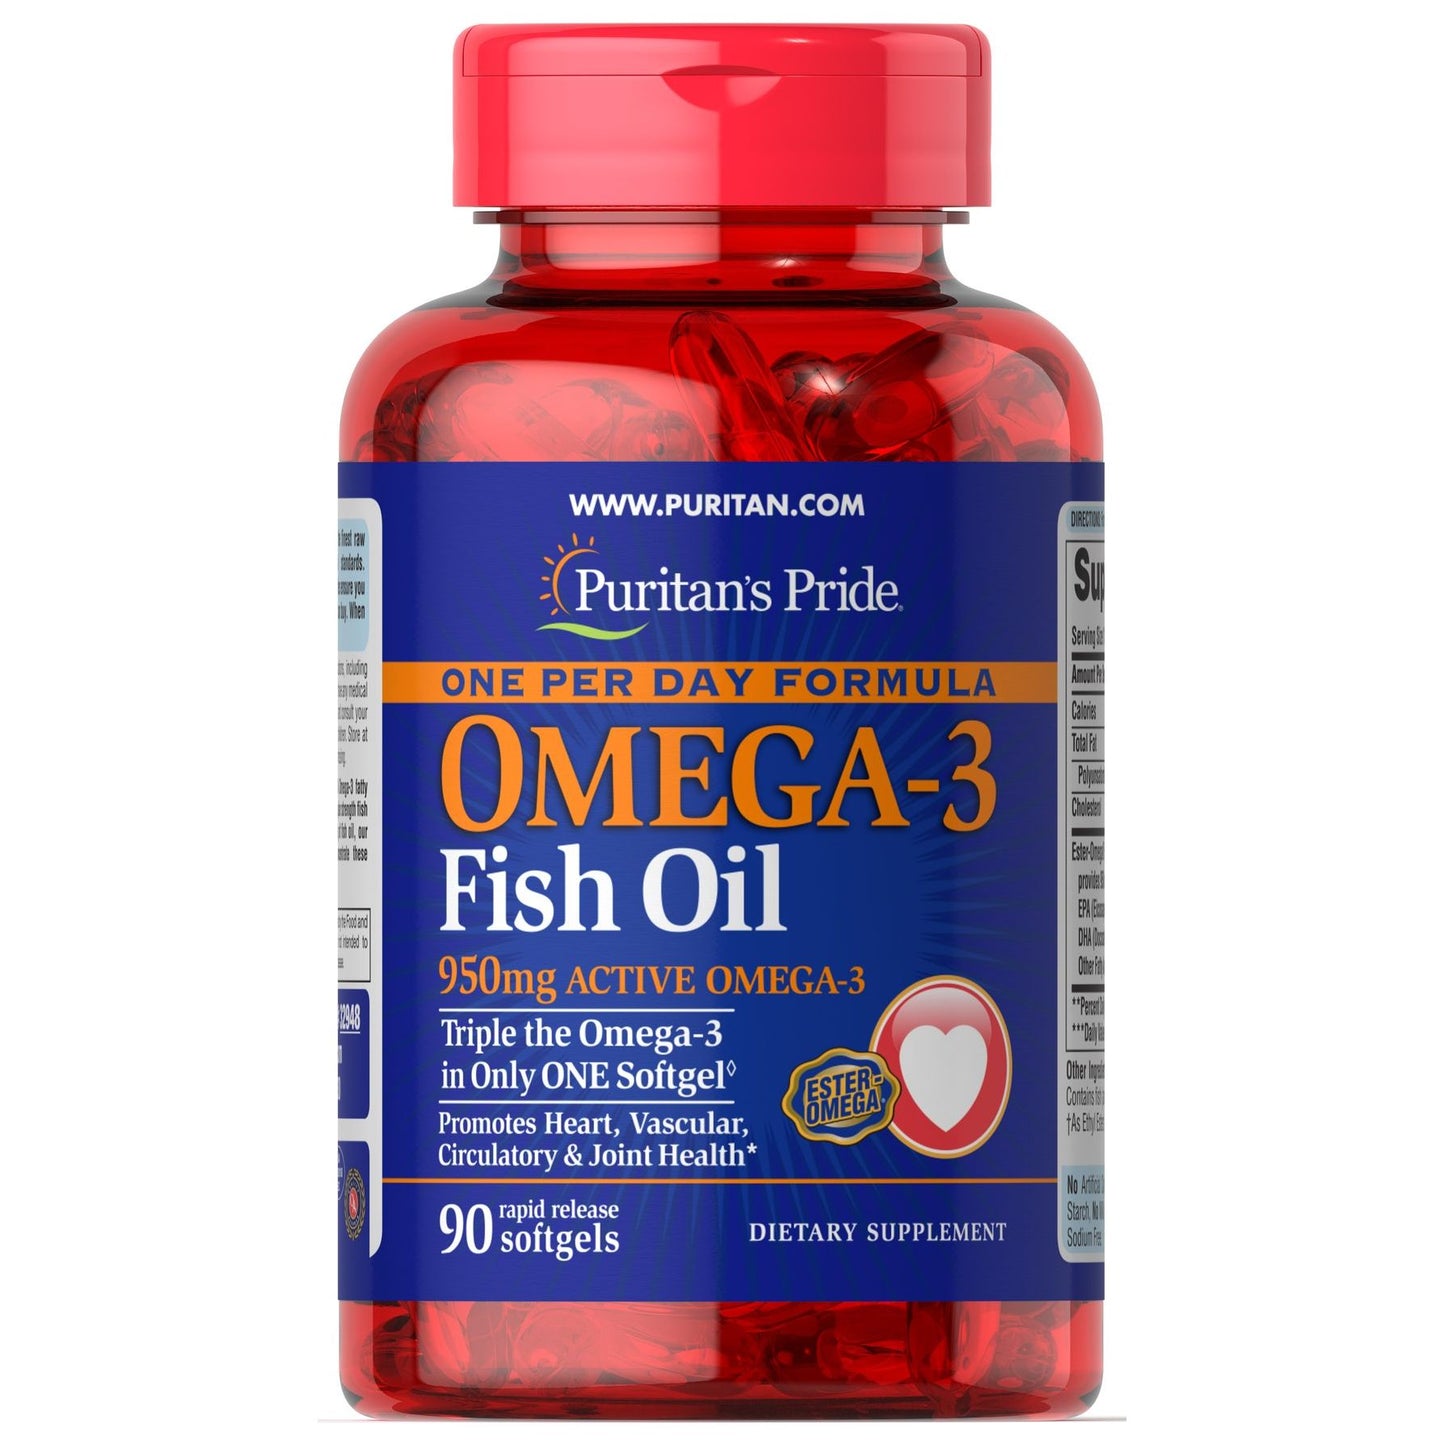 One Per Day Omega-3 Fish Oil 1360 mg (950 mg Active Omega-3) 90 softgels | CLEARANCE 50% OFF